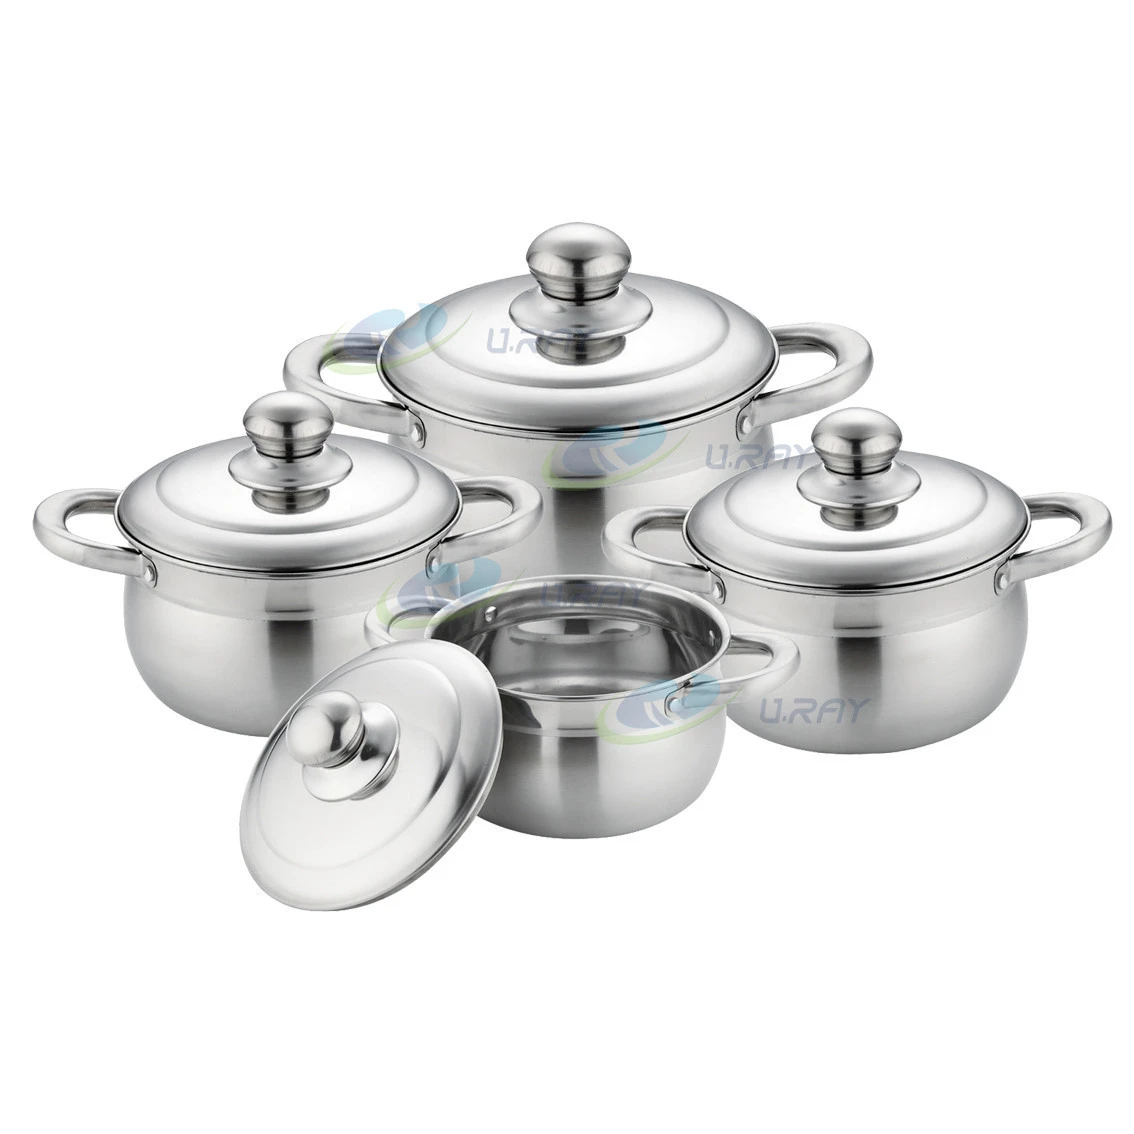 New arrival brand new hot pot 4pcs stainless steel casserole cookware set  with Tubular handle